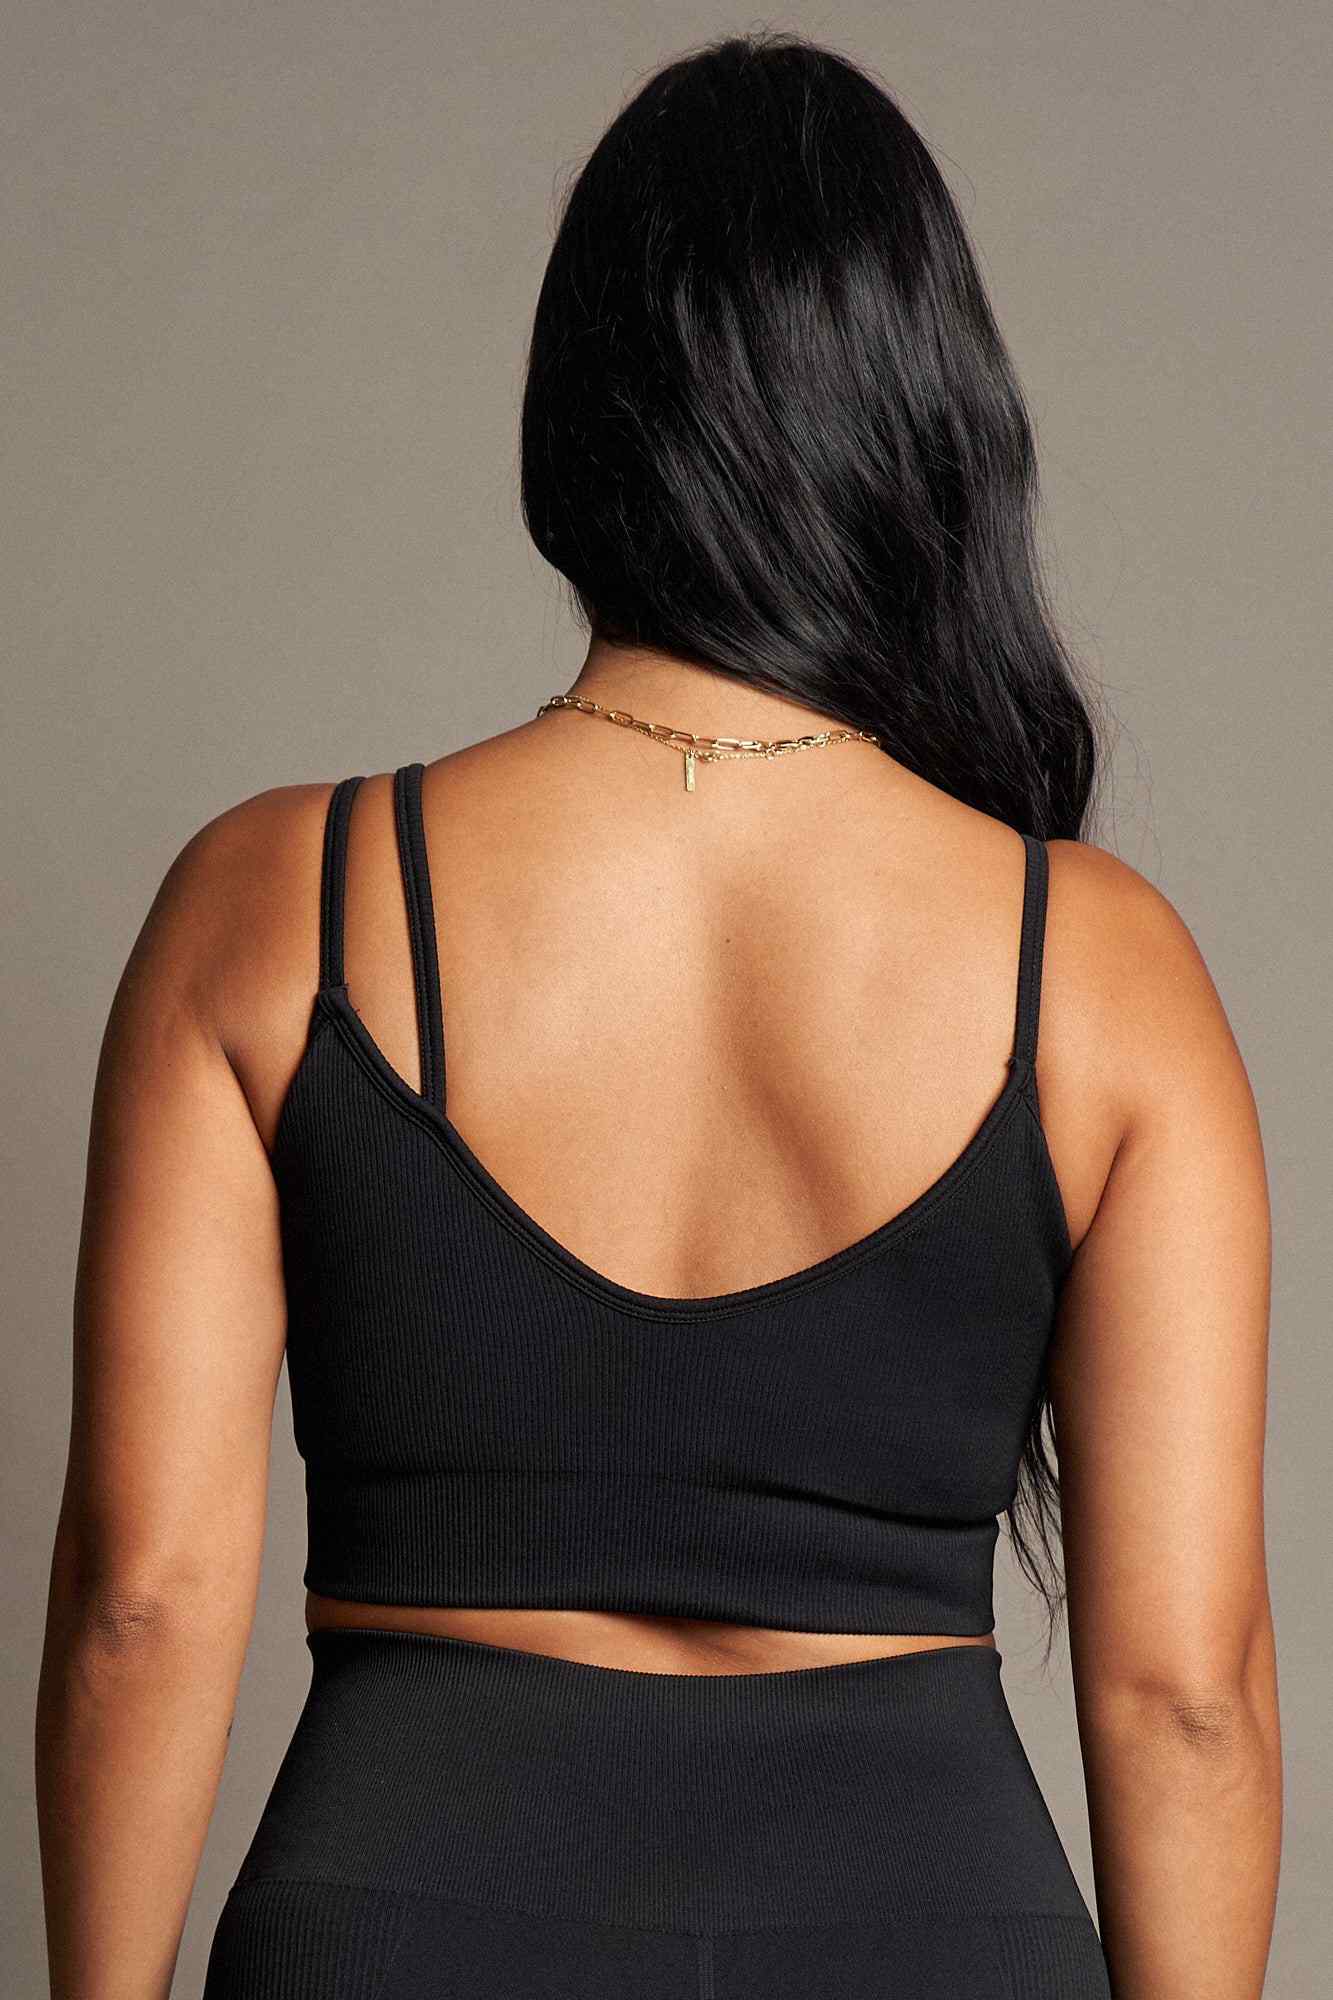 Blues Bra in Black-Bras-Shop Clothing Sustainable Recycled Yoga Leggings Women's On-line Barcelona Believe Athletics Sustainable Recycled Yoga Clothes